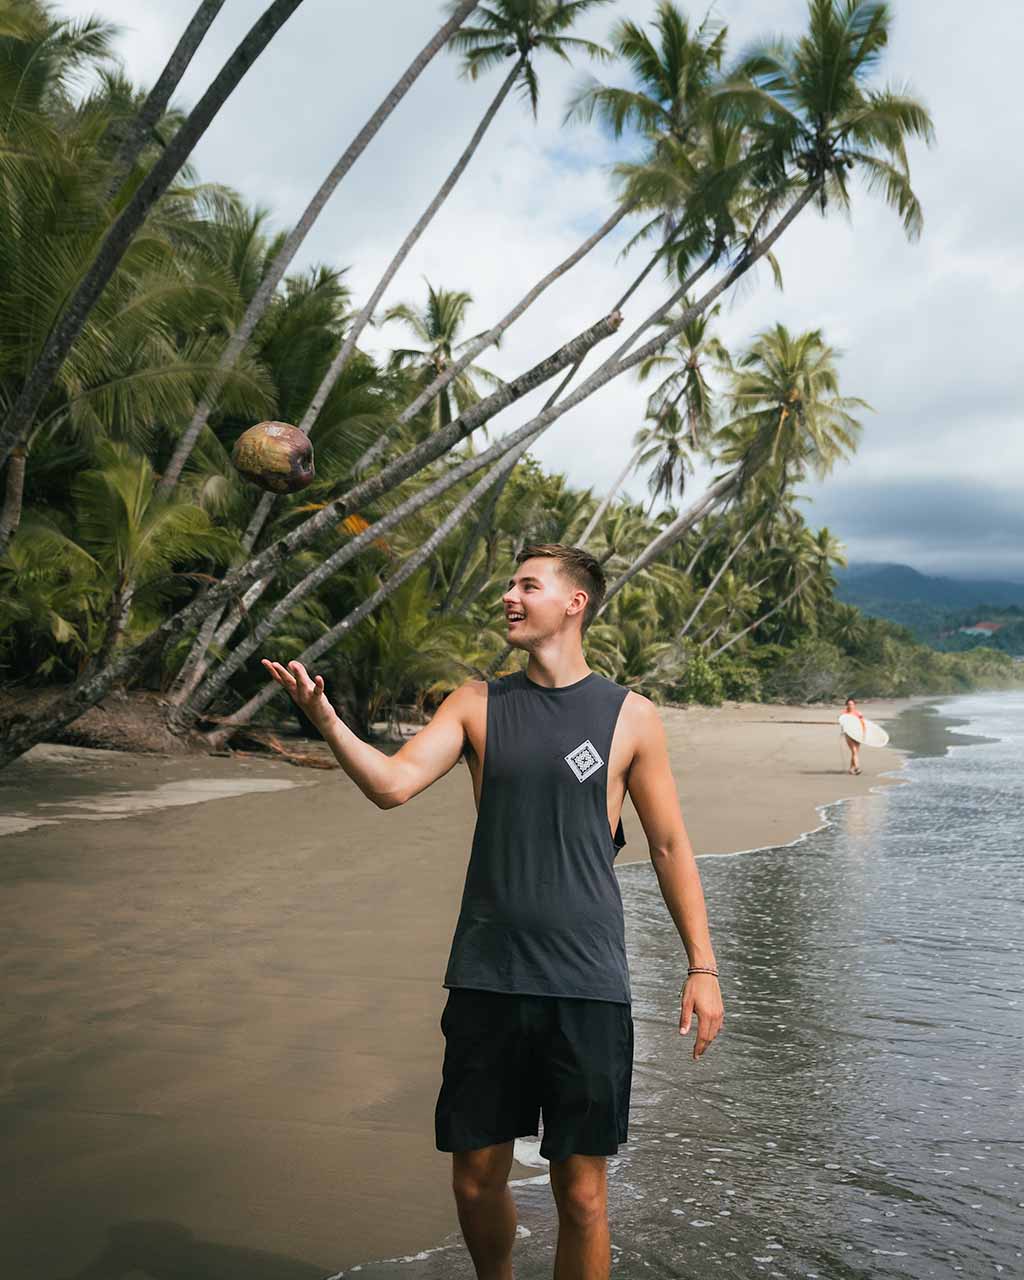 A person throwing a coconut on Uvita Beach in Costa Rica.